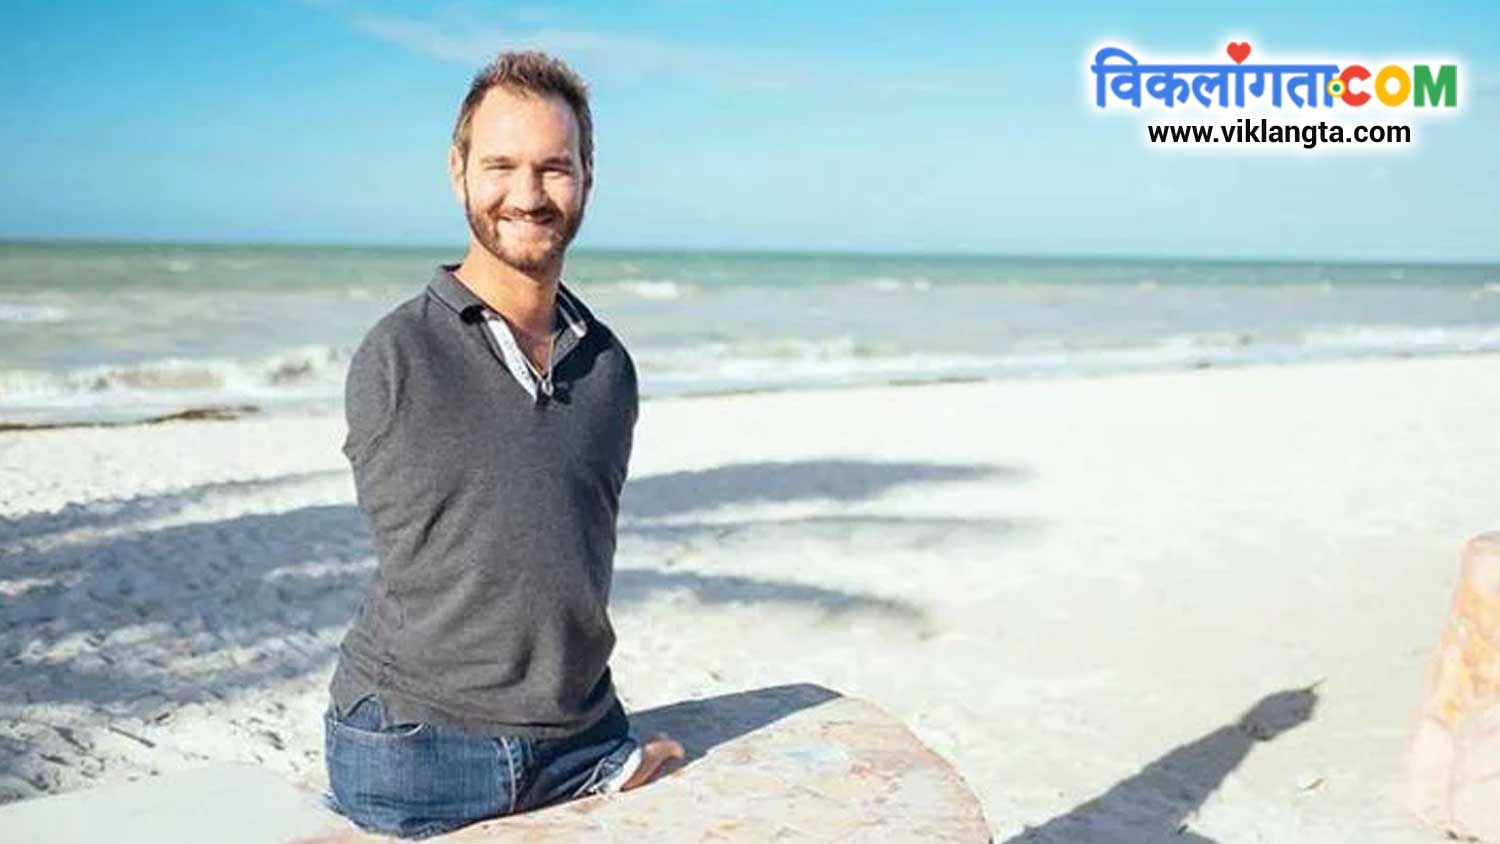 famous disabled person in the world Nick Vujicic